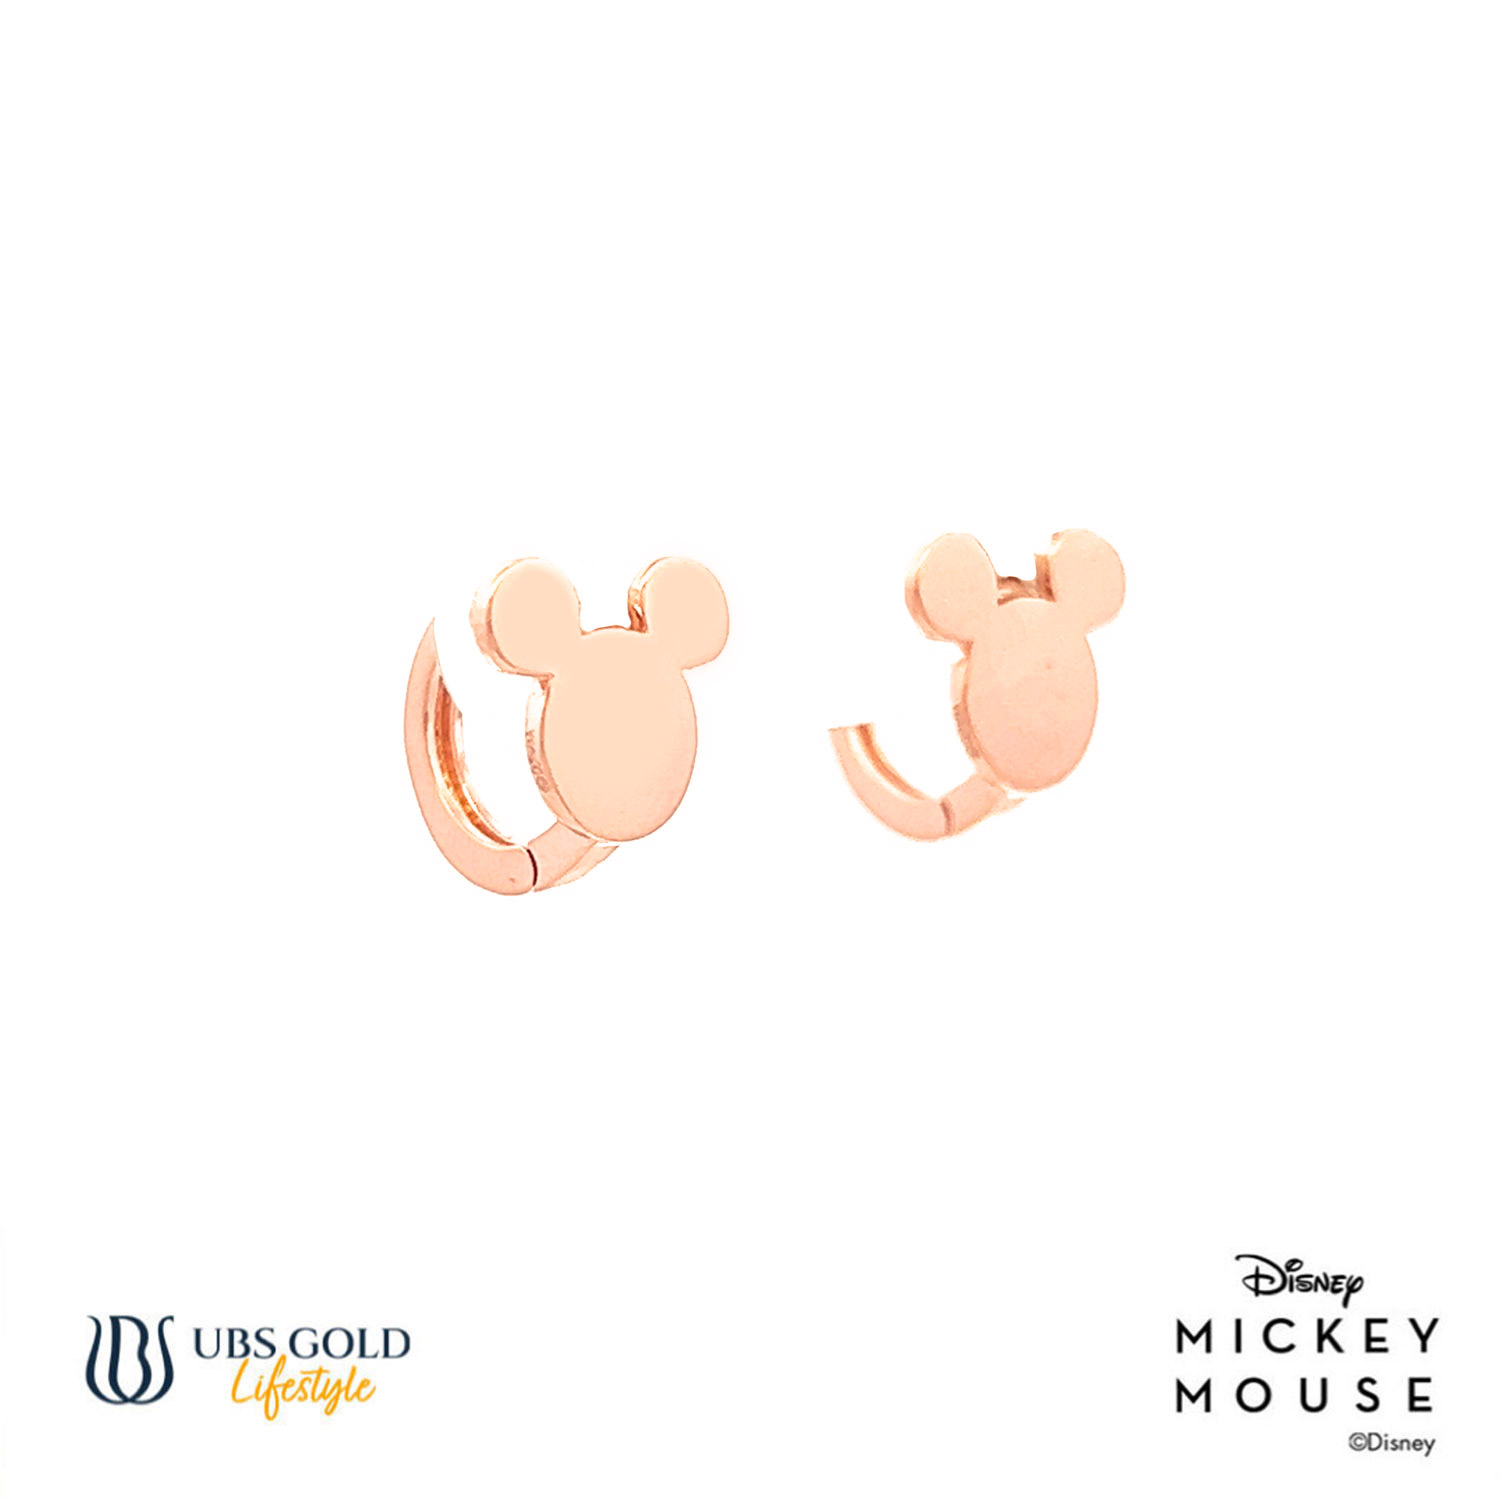 UBS Gold Anting Emas Disney Mickey Mouse - Cay0017 - 17K